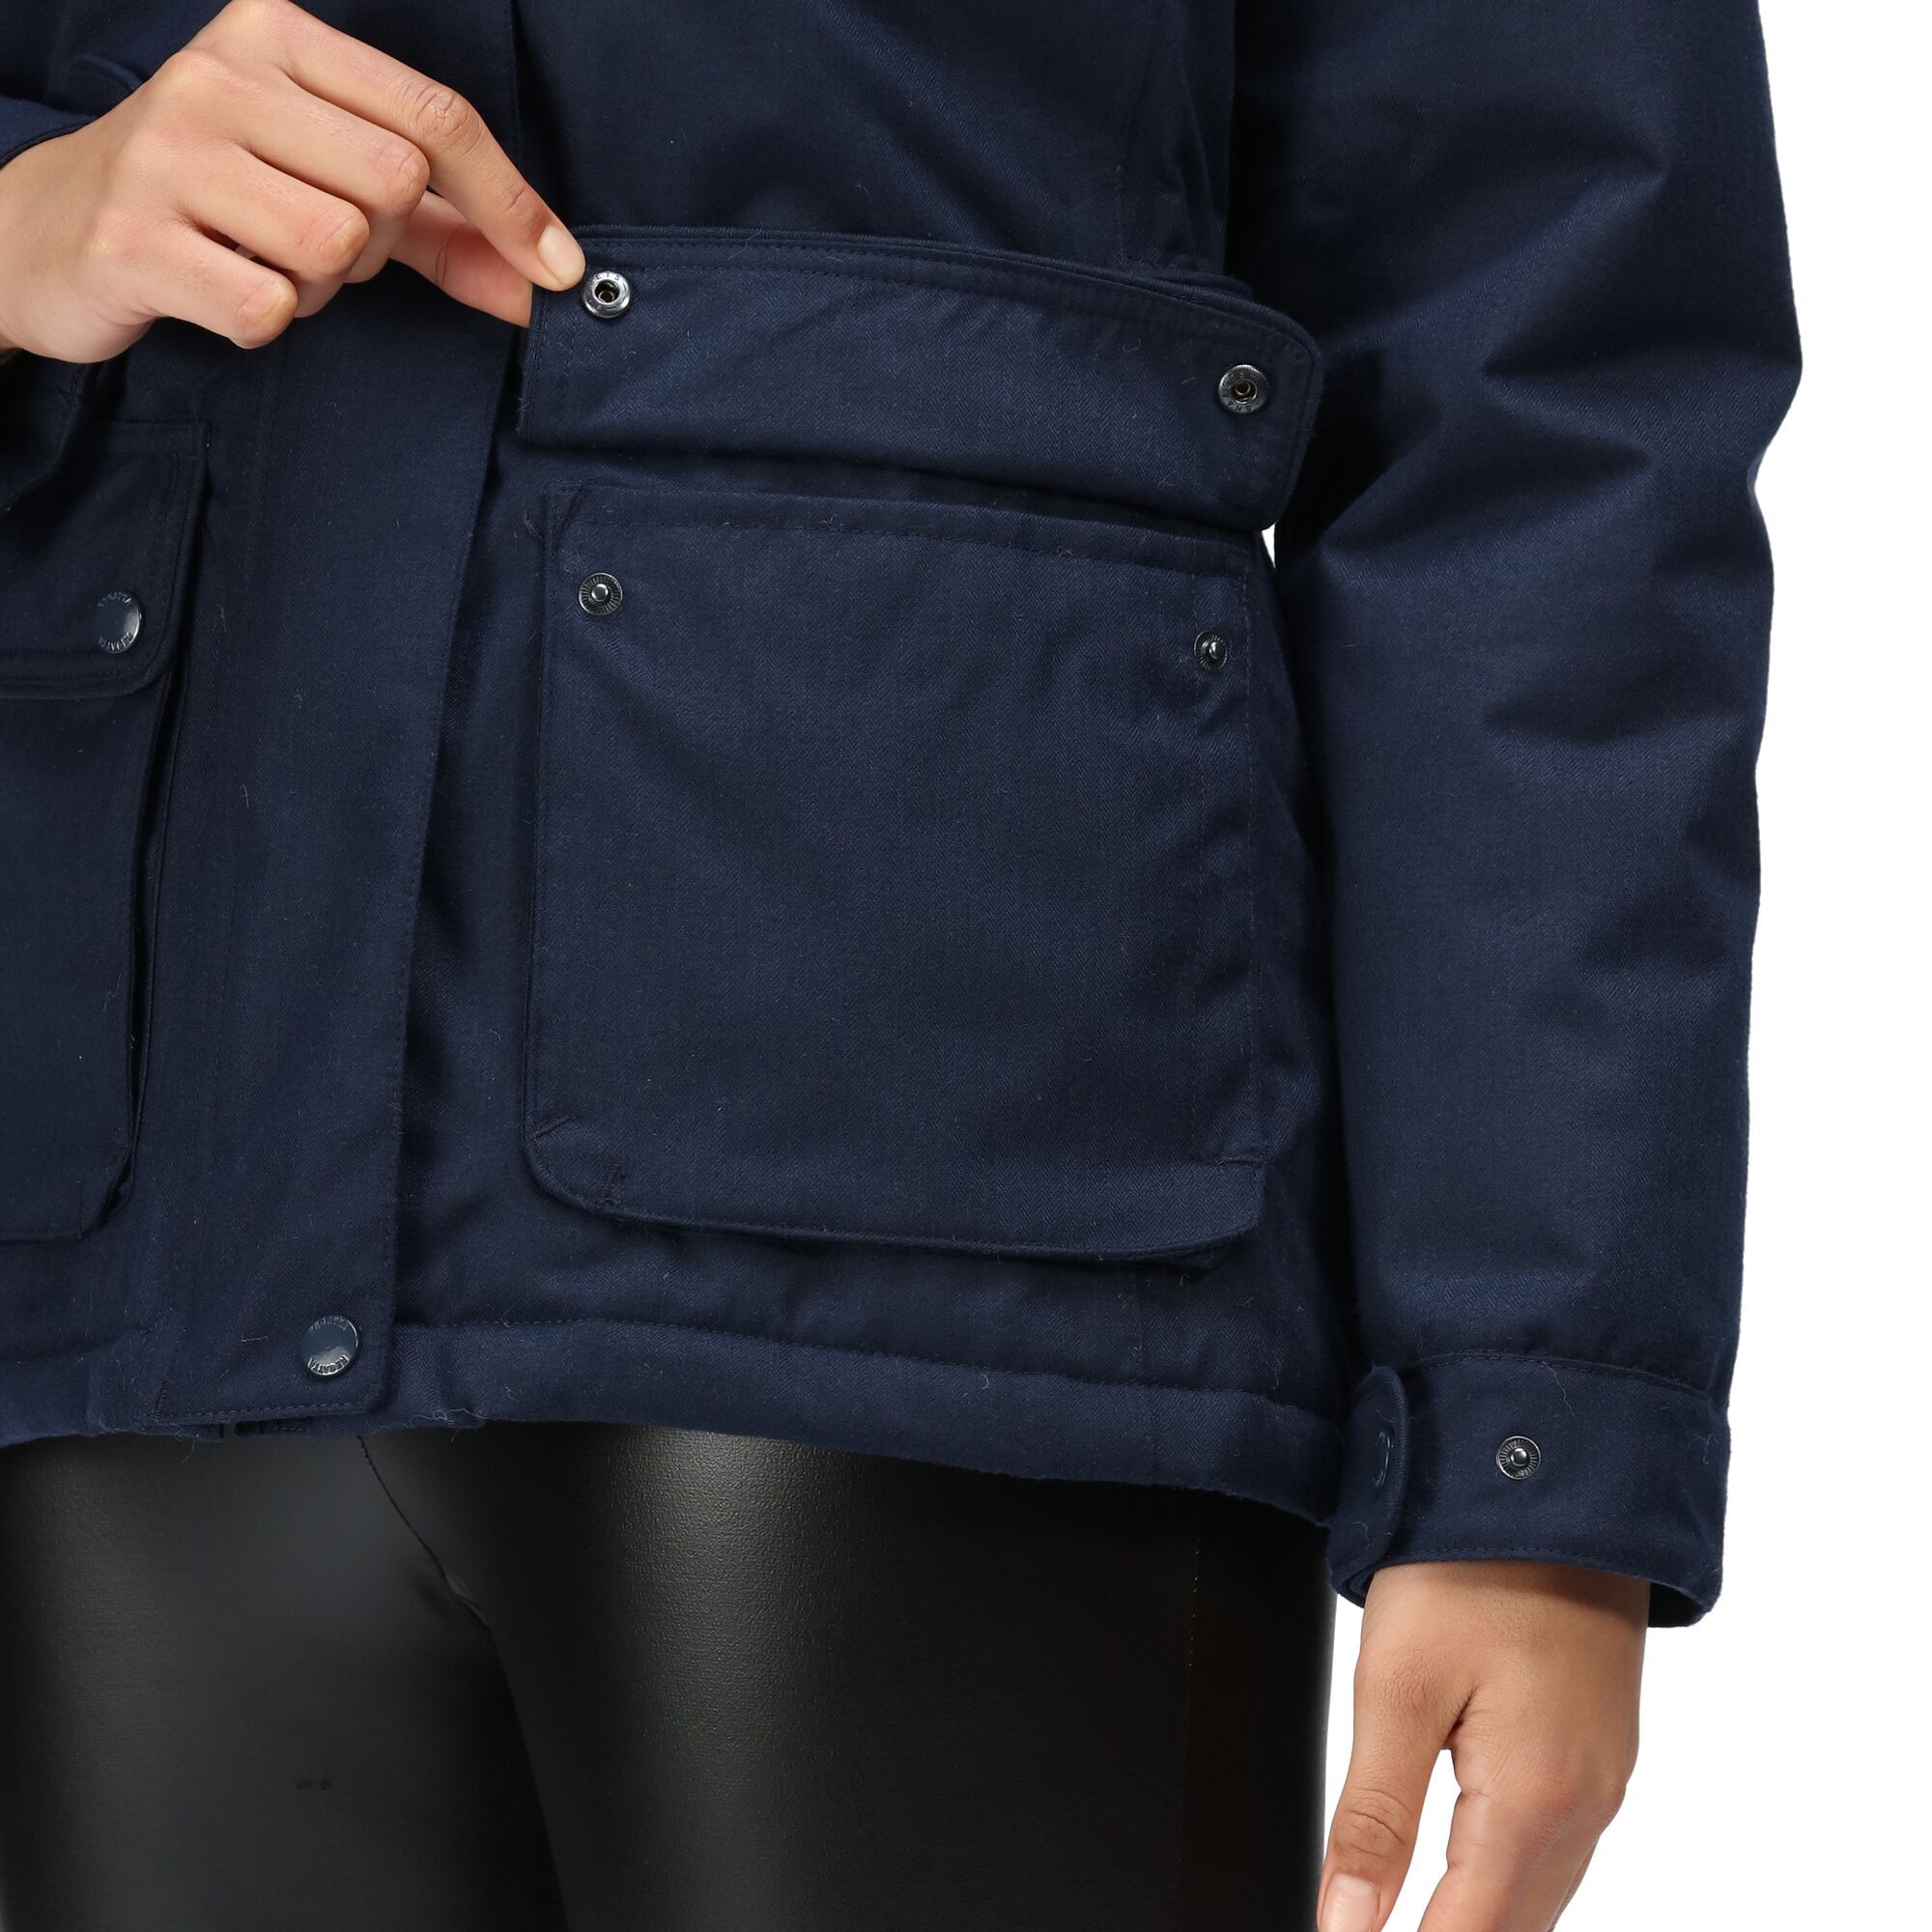 Material: 100% Polyester. Design: Plain. Fit: Regular. Breathable, Faux Fur Collar, Insulated, Side Slits, Waterproof. Fabric Technology: Isotex 8000, Thermo-Guard. Cuff: Adjustable, Stud. Neckline: High Collar. Sleeve-Type: Long-Sleeved. Length: Regular. Pockets: 2 Lower Pockets. Fastening: Stud, Zip. Hem: Adjustable, Part Elasticated, Stud.